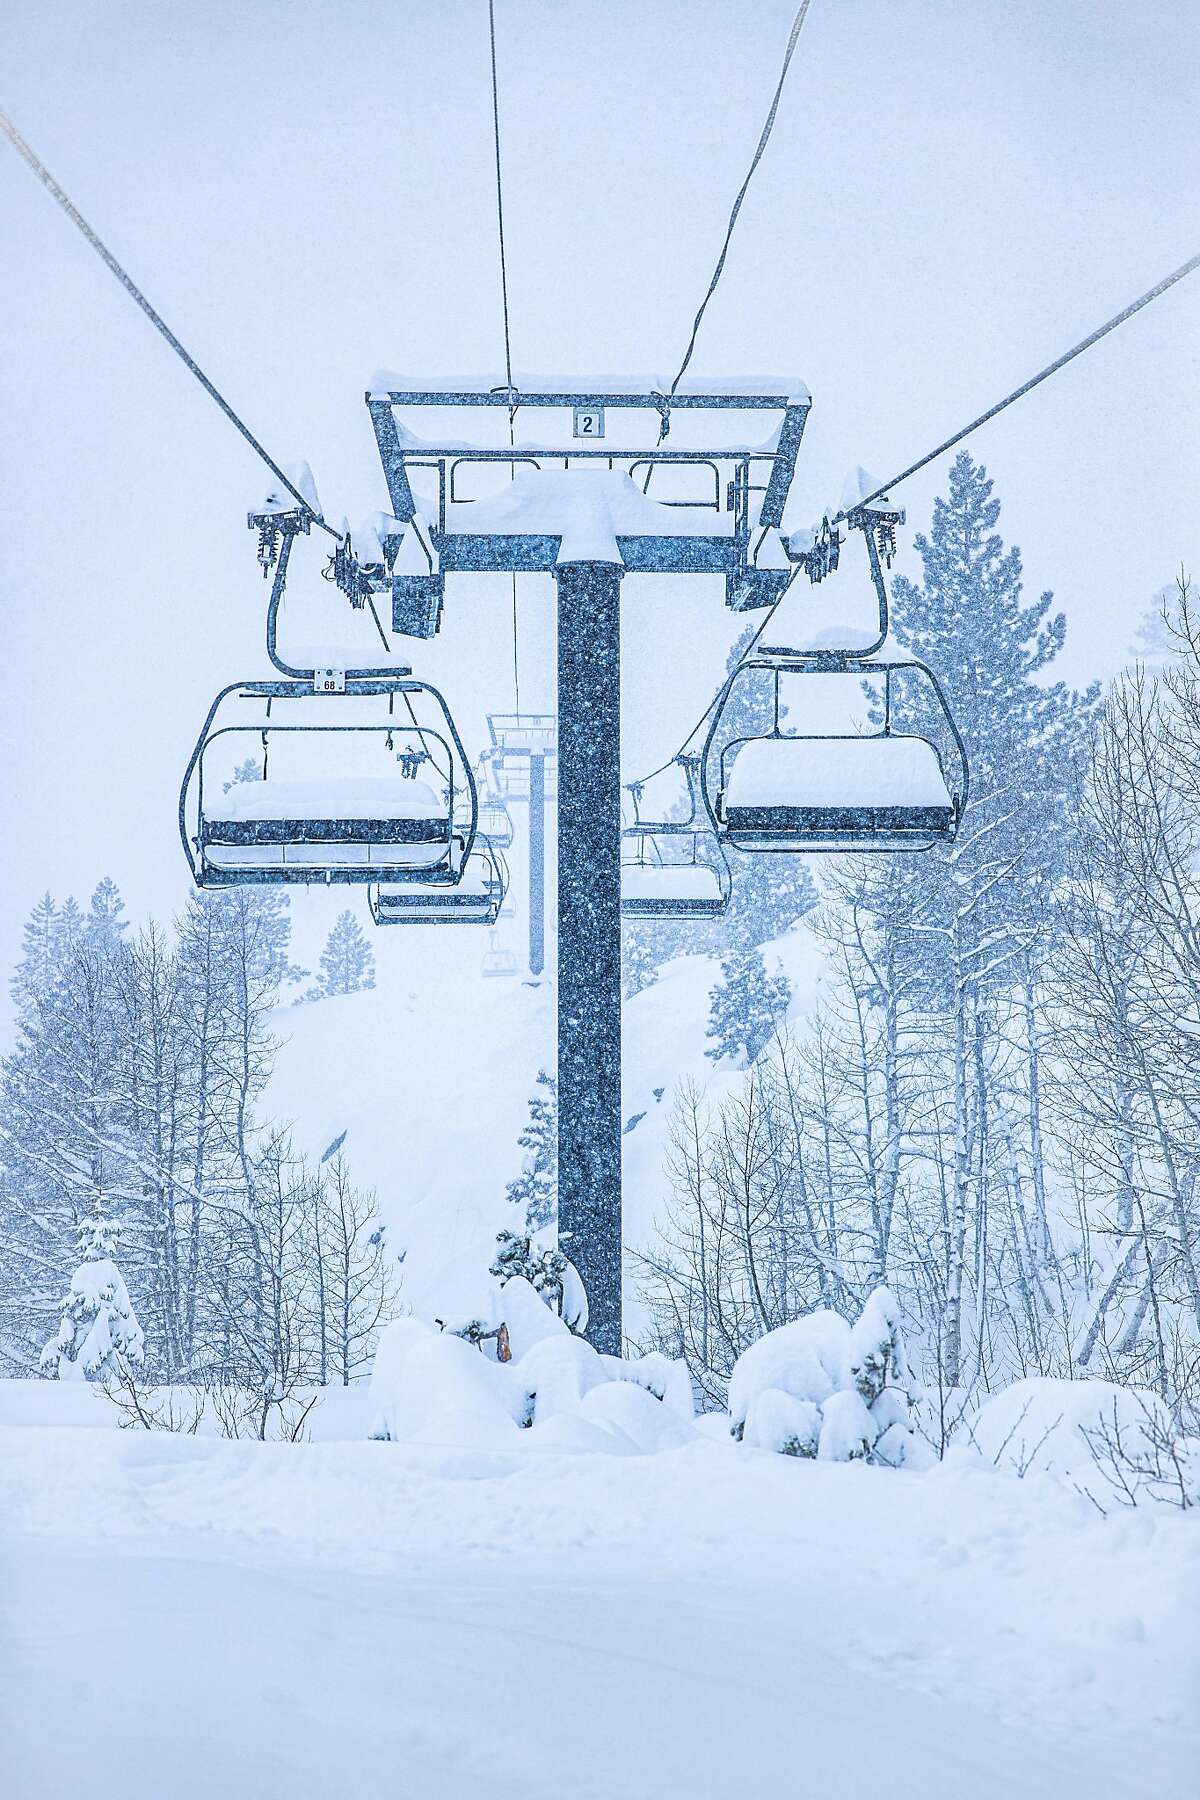 Squaw Valley base area on Sunday March 15, 2020. Most Lake Tahoe ski resorts have shut down due to coronavirus fears.